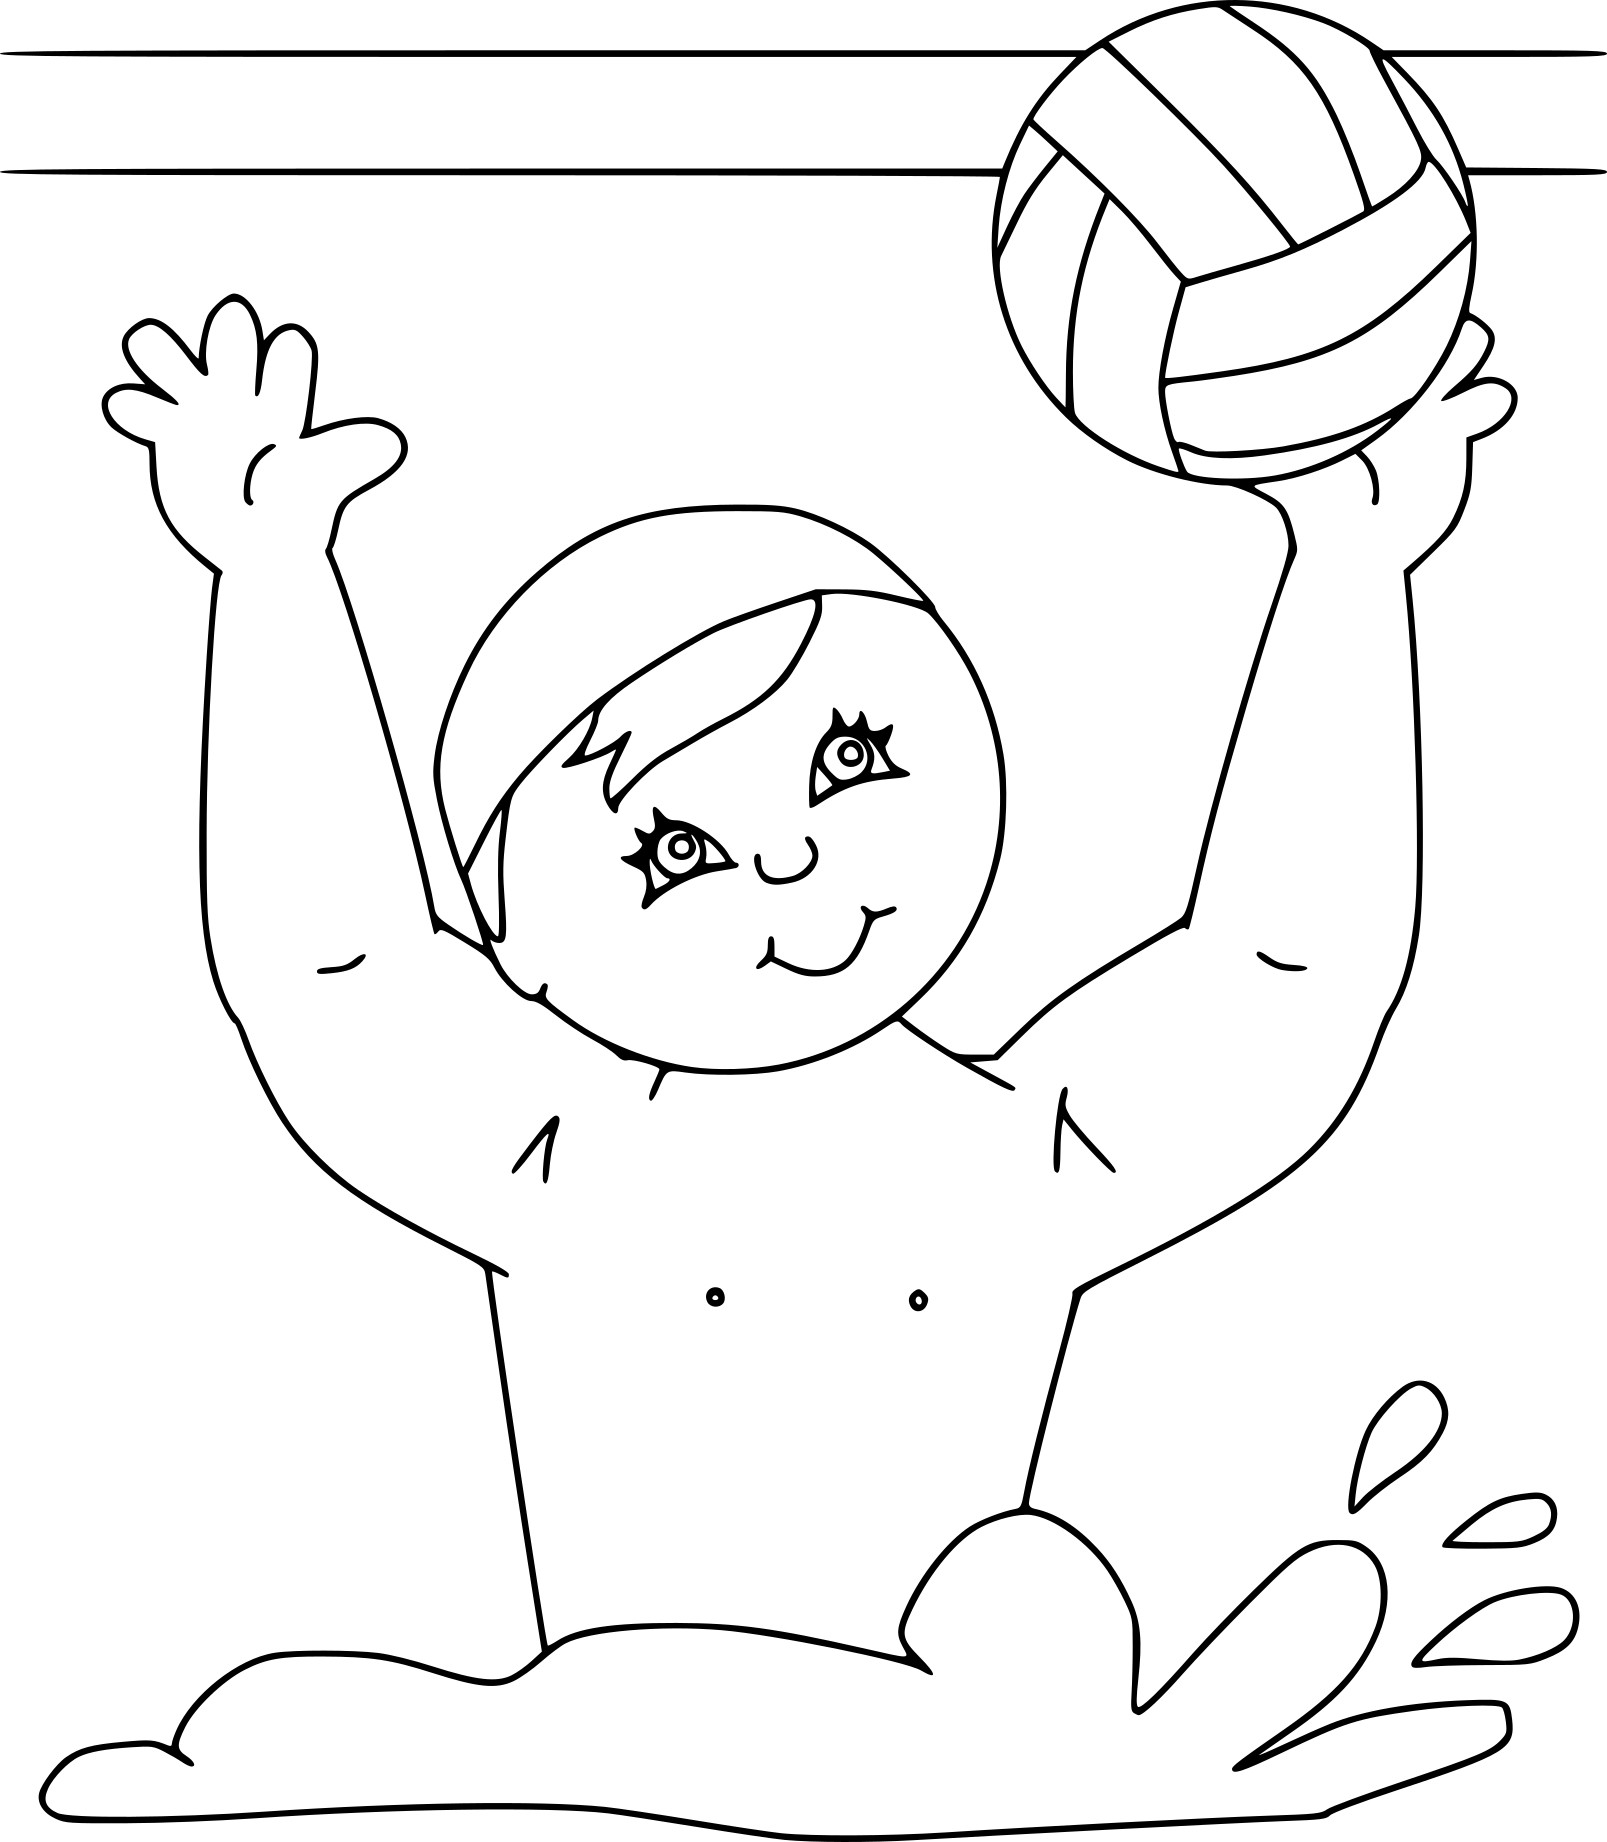 Waterpolo coloring page